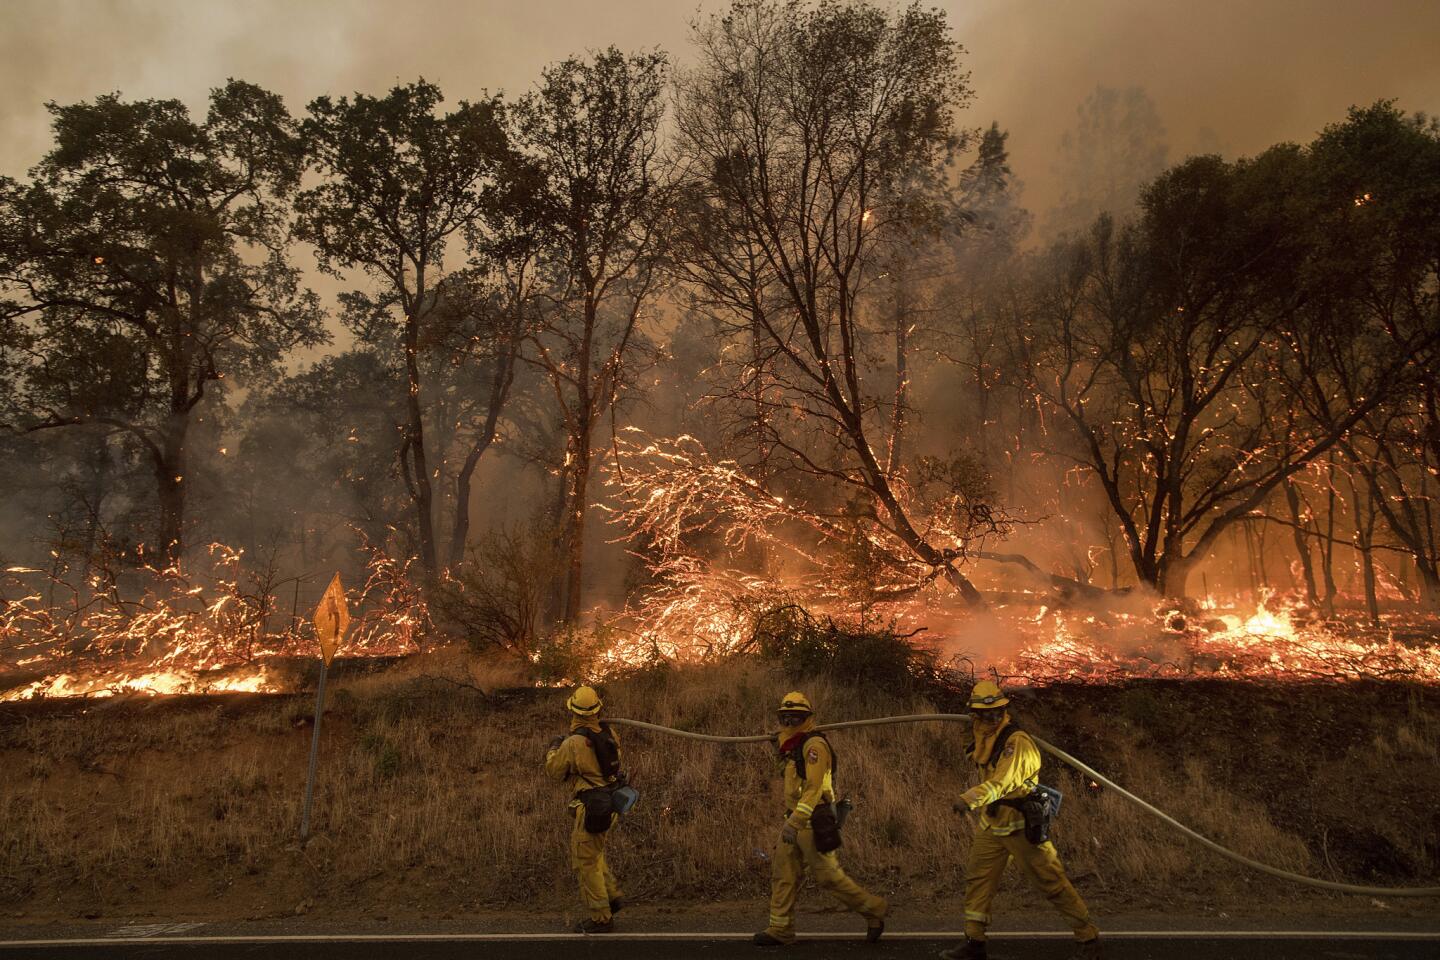 Firefighters battle a wildfire as it threatens to jump a street near Oroville, Calif., on July 8, 2017. Evening winds drove the fire through several neighborhoods leveling homes in its path.